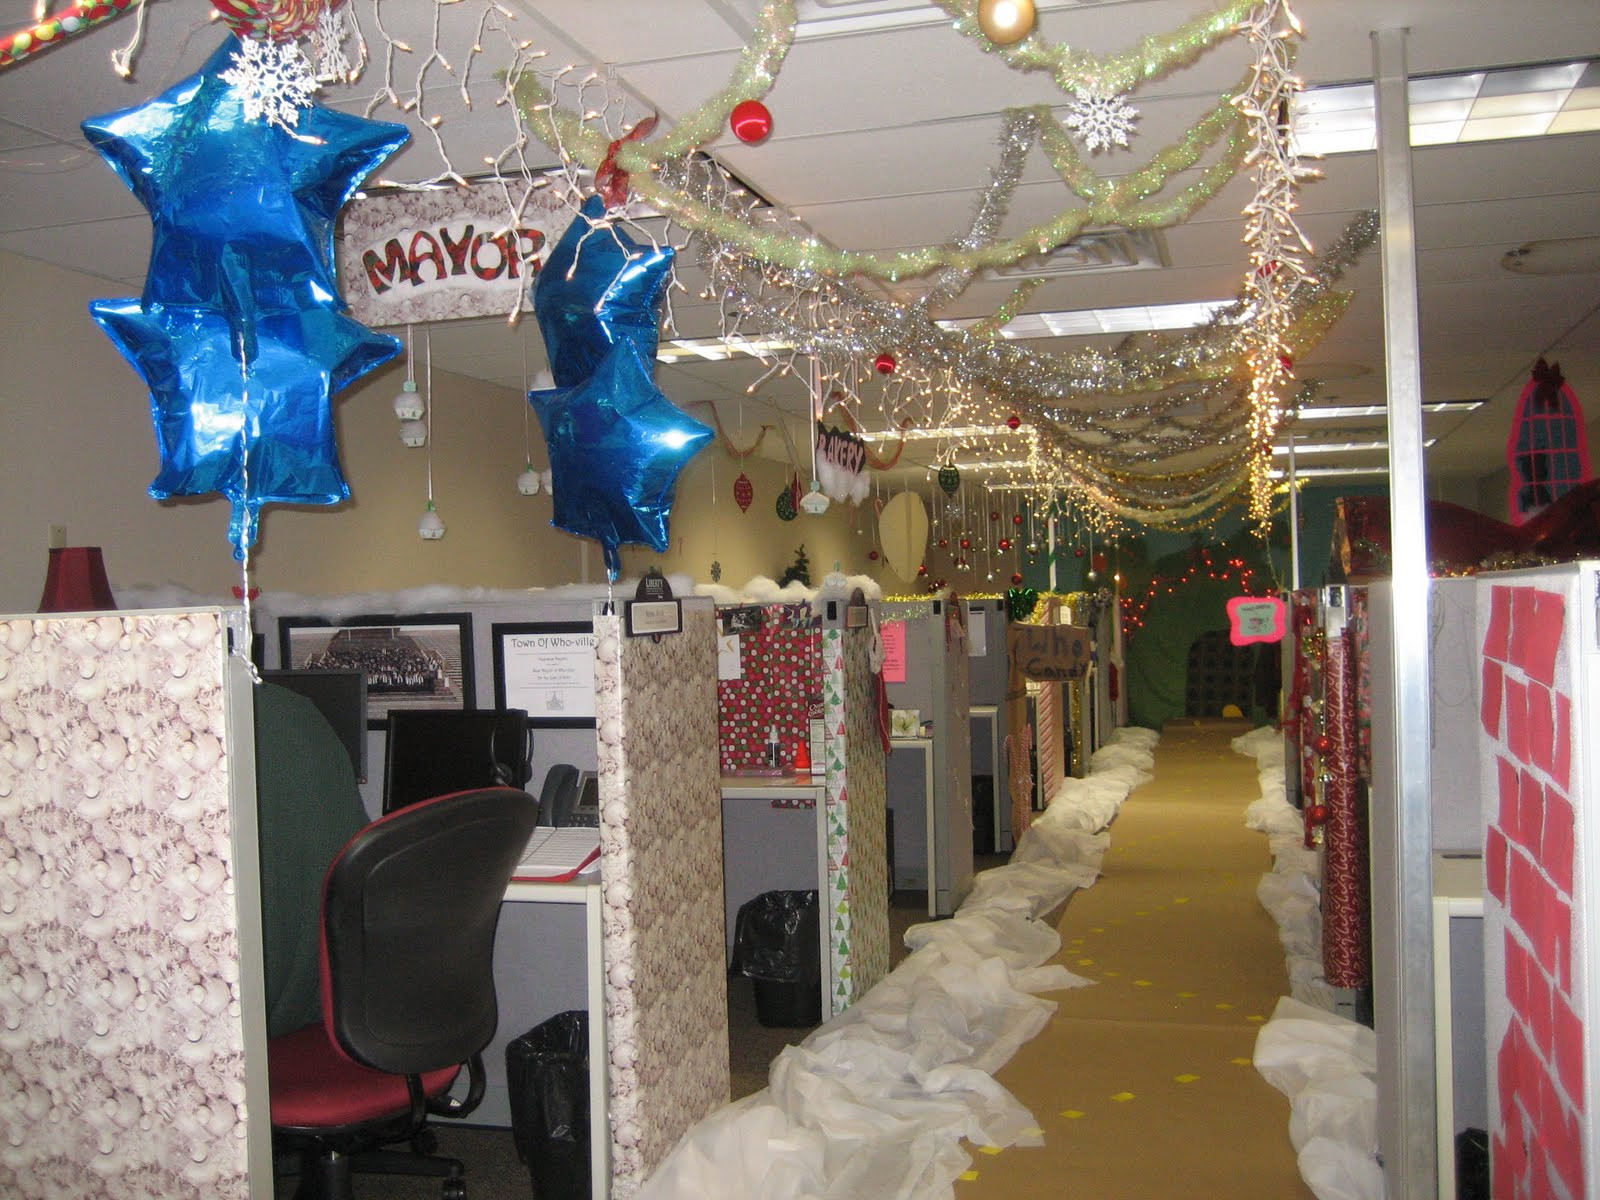 Office Cubicle Christmas Decorating Ideas
 25 Stunning fice Christmas Decorations Ideas